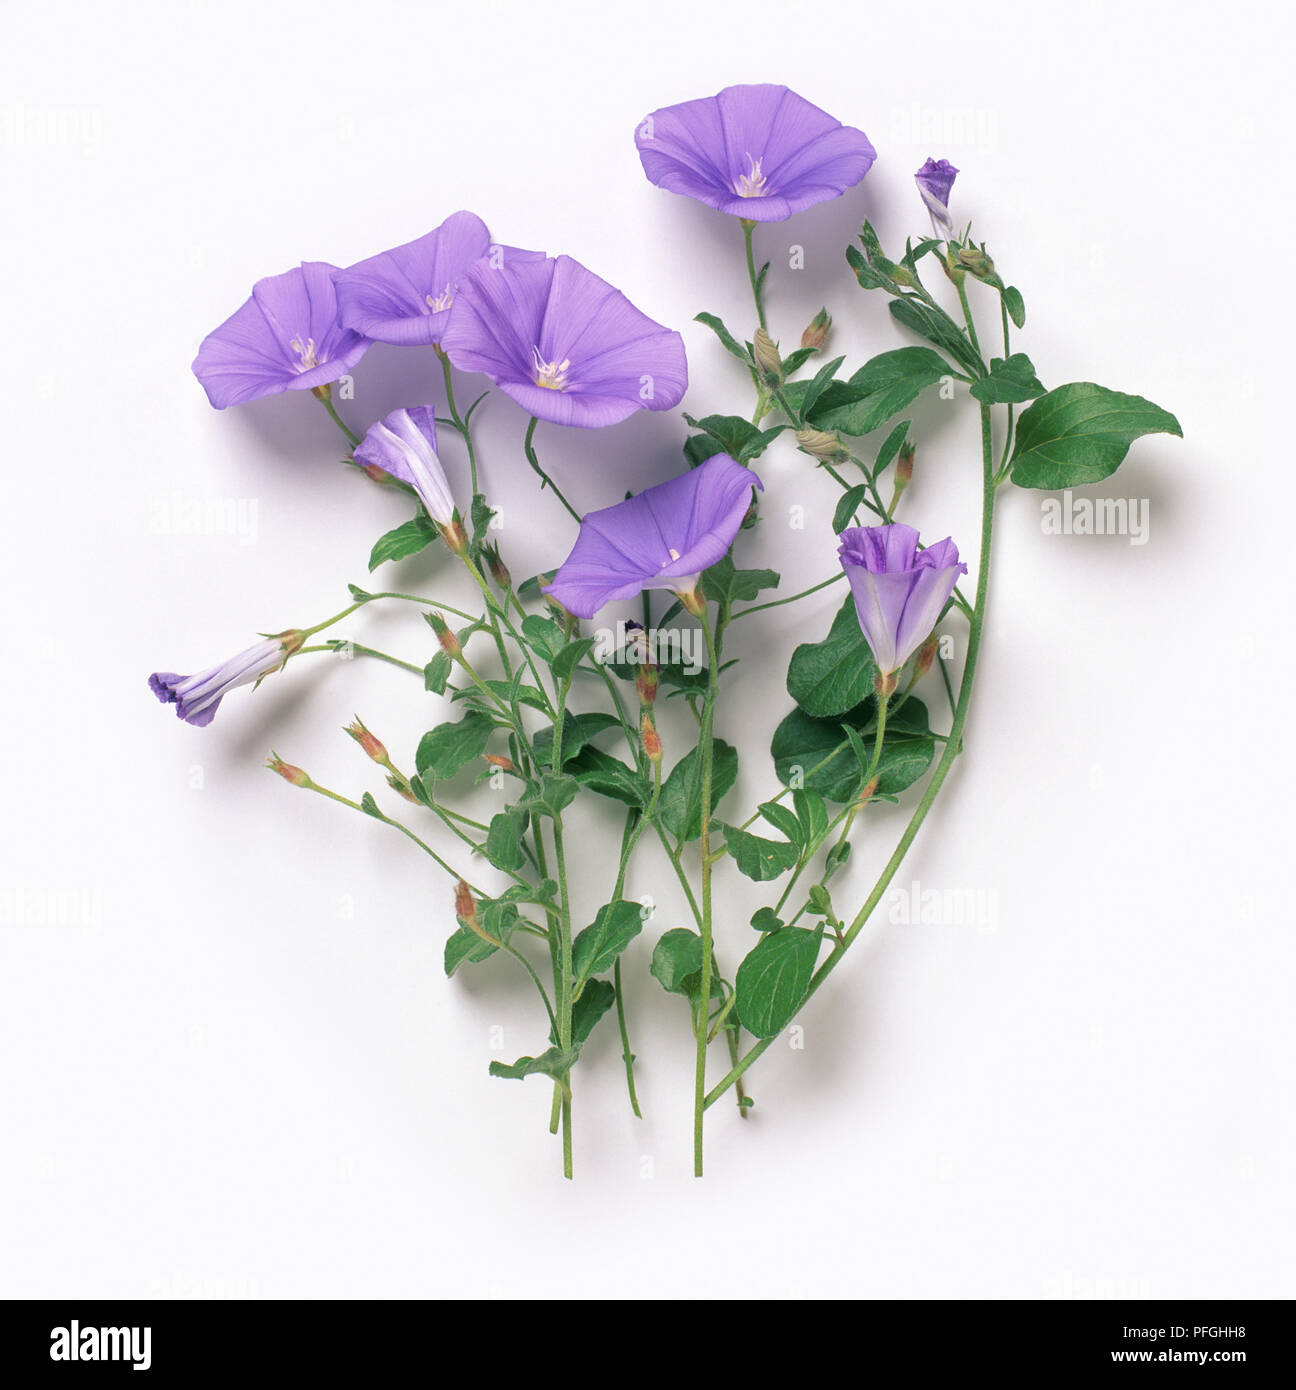 Convolvulus sabatius (Bindweed), blue flowers and green leaves, close-up Stock Photo